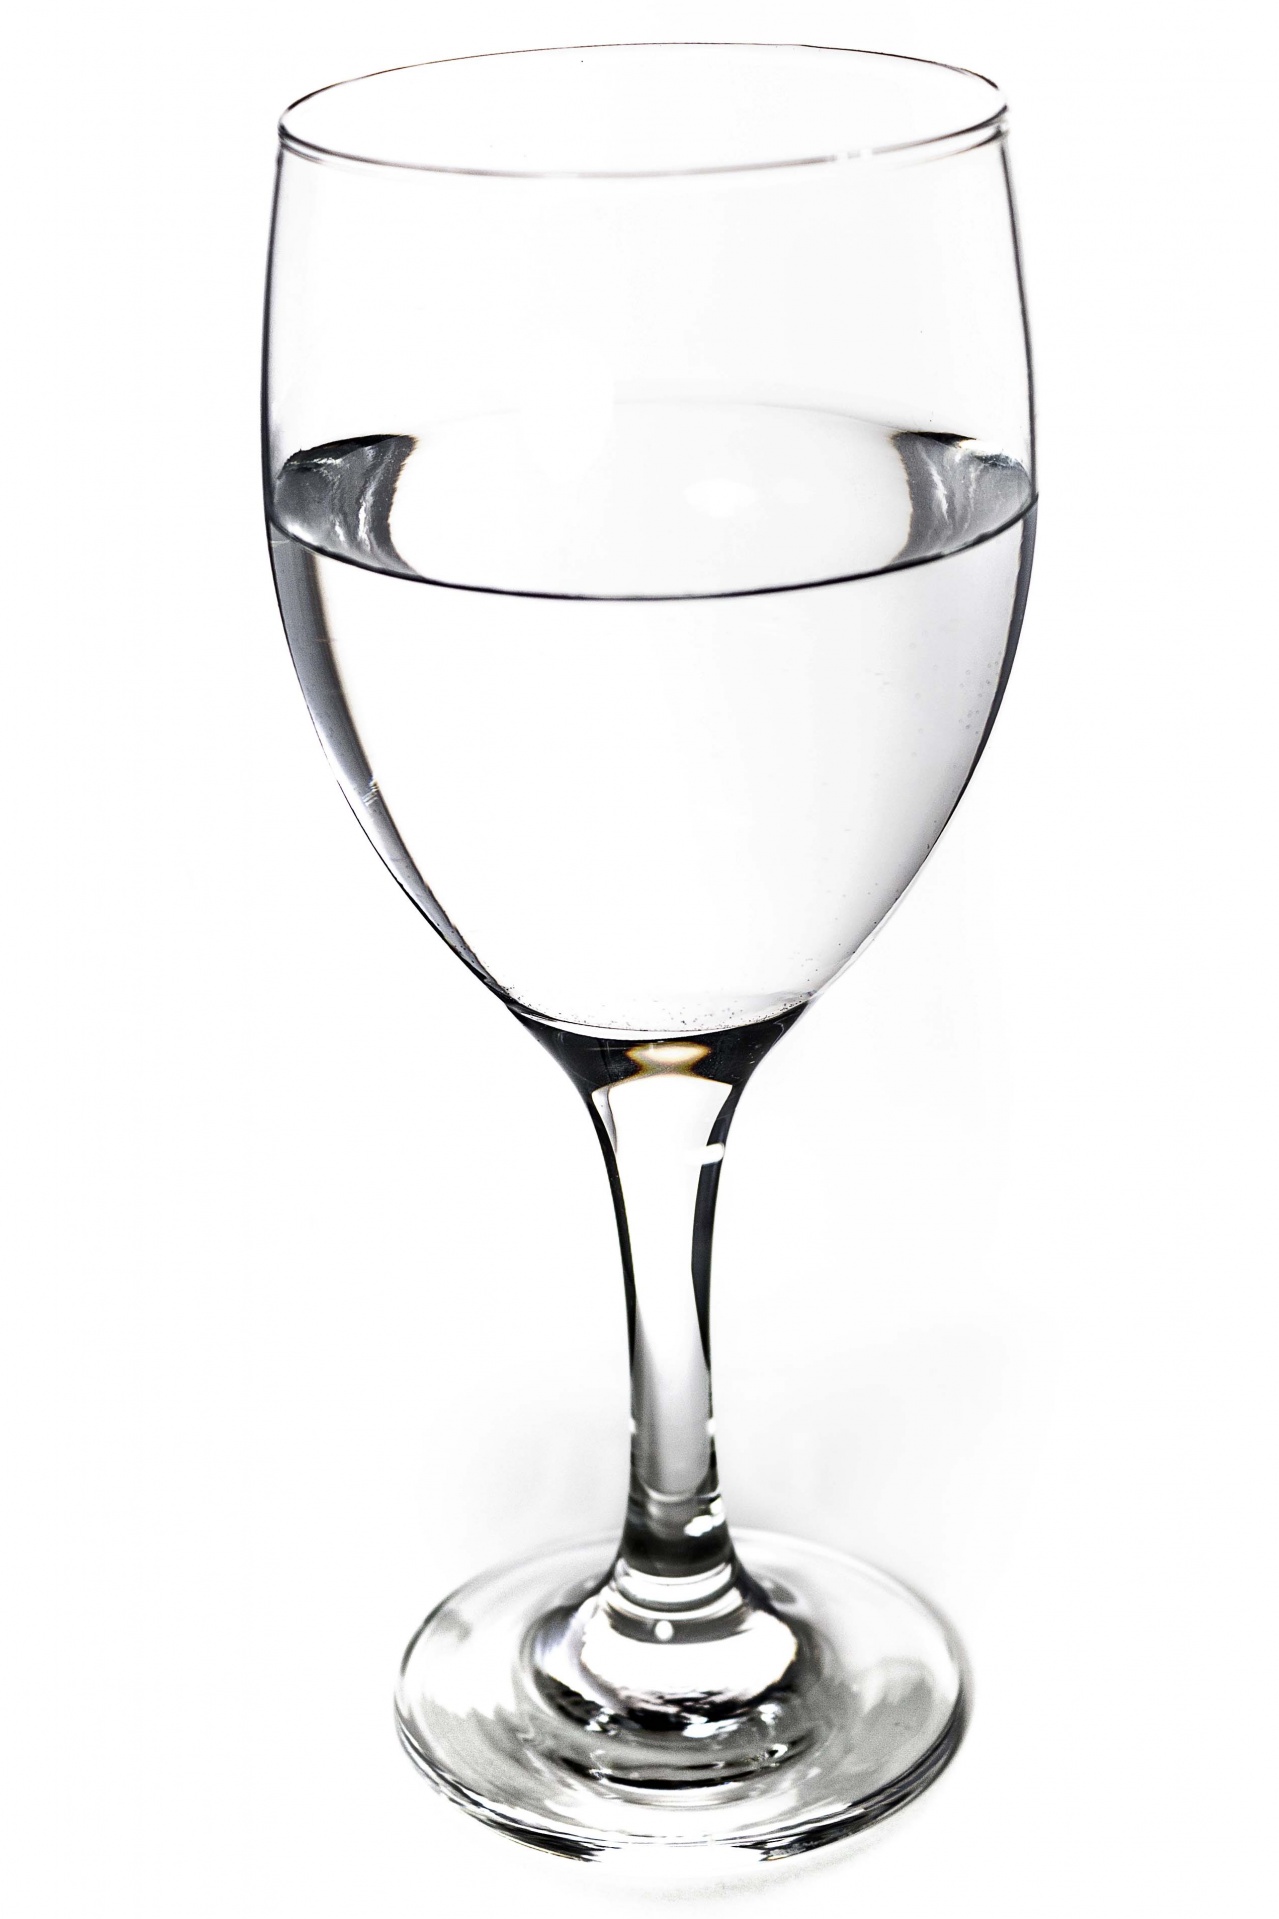 https://storage.needpix.com/rsynced_images/glass-with-water-white-background-1474130976M9n.jpg